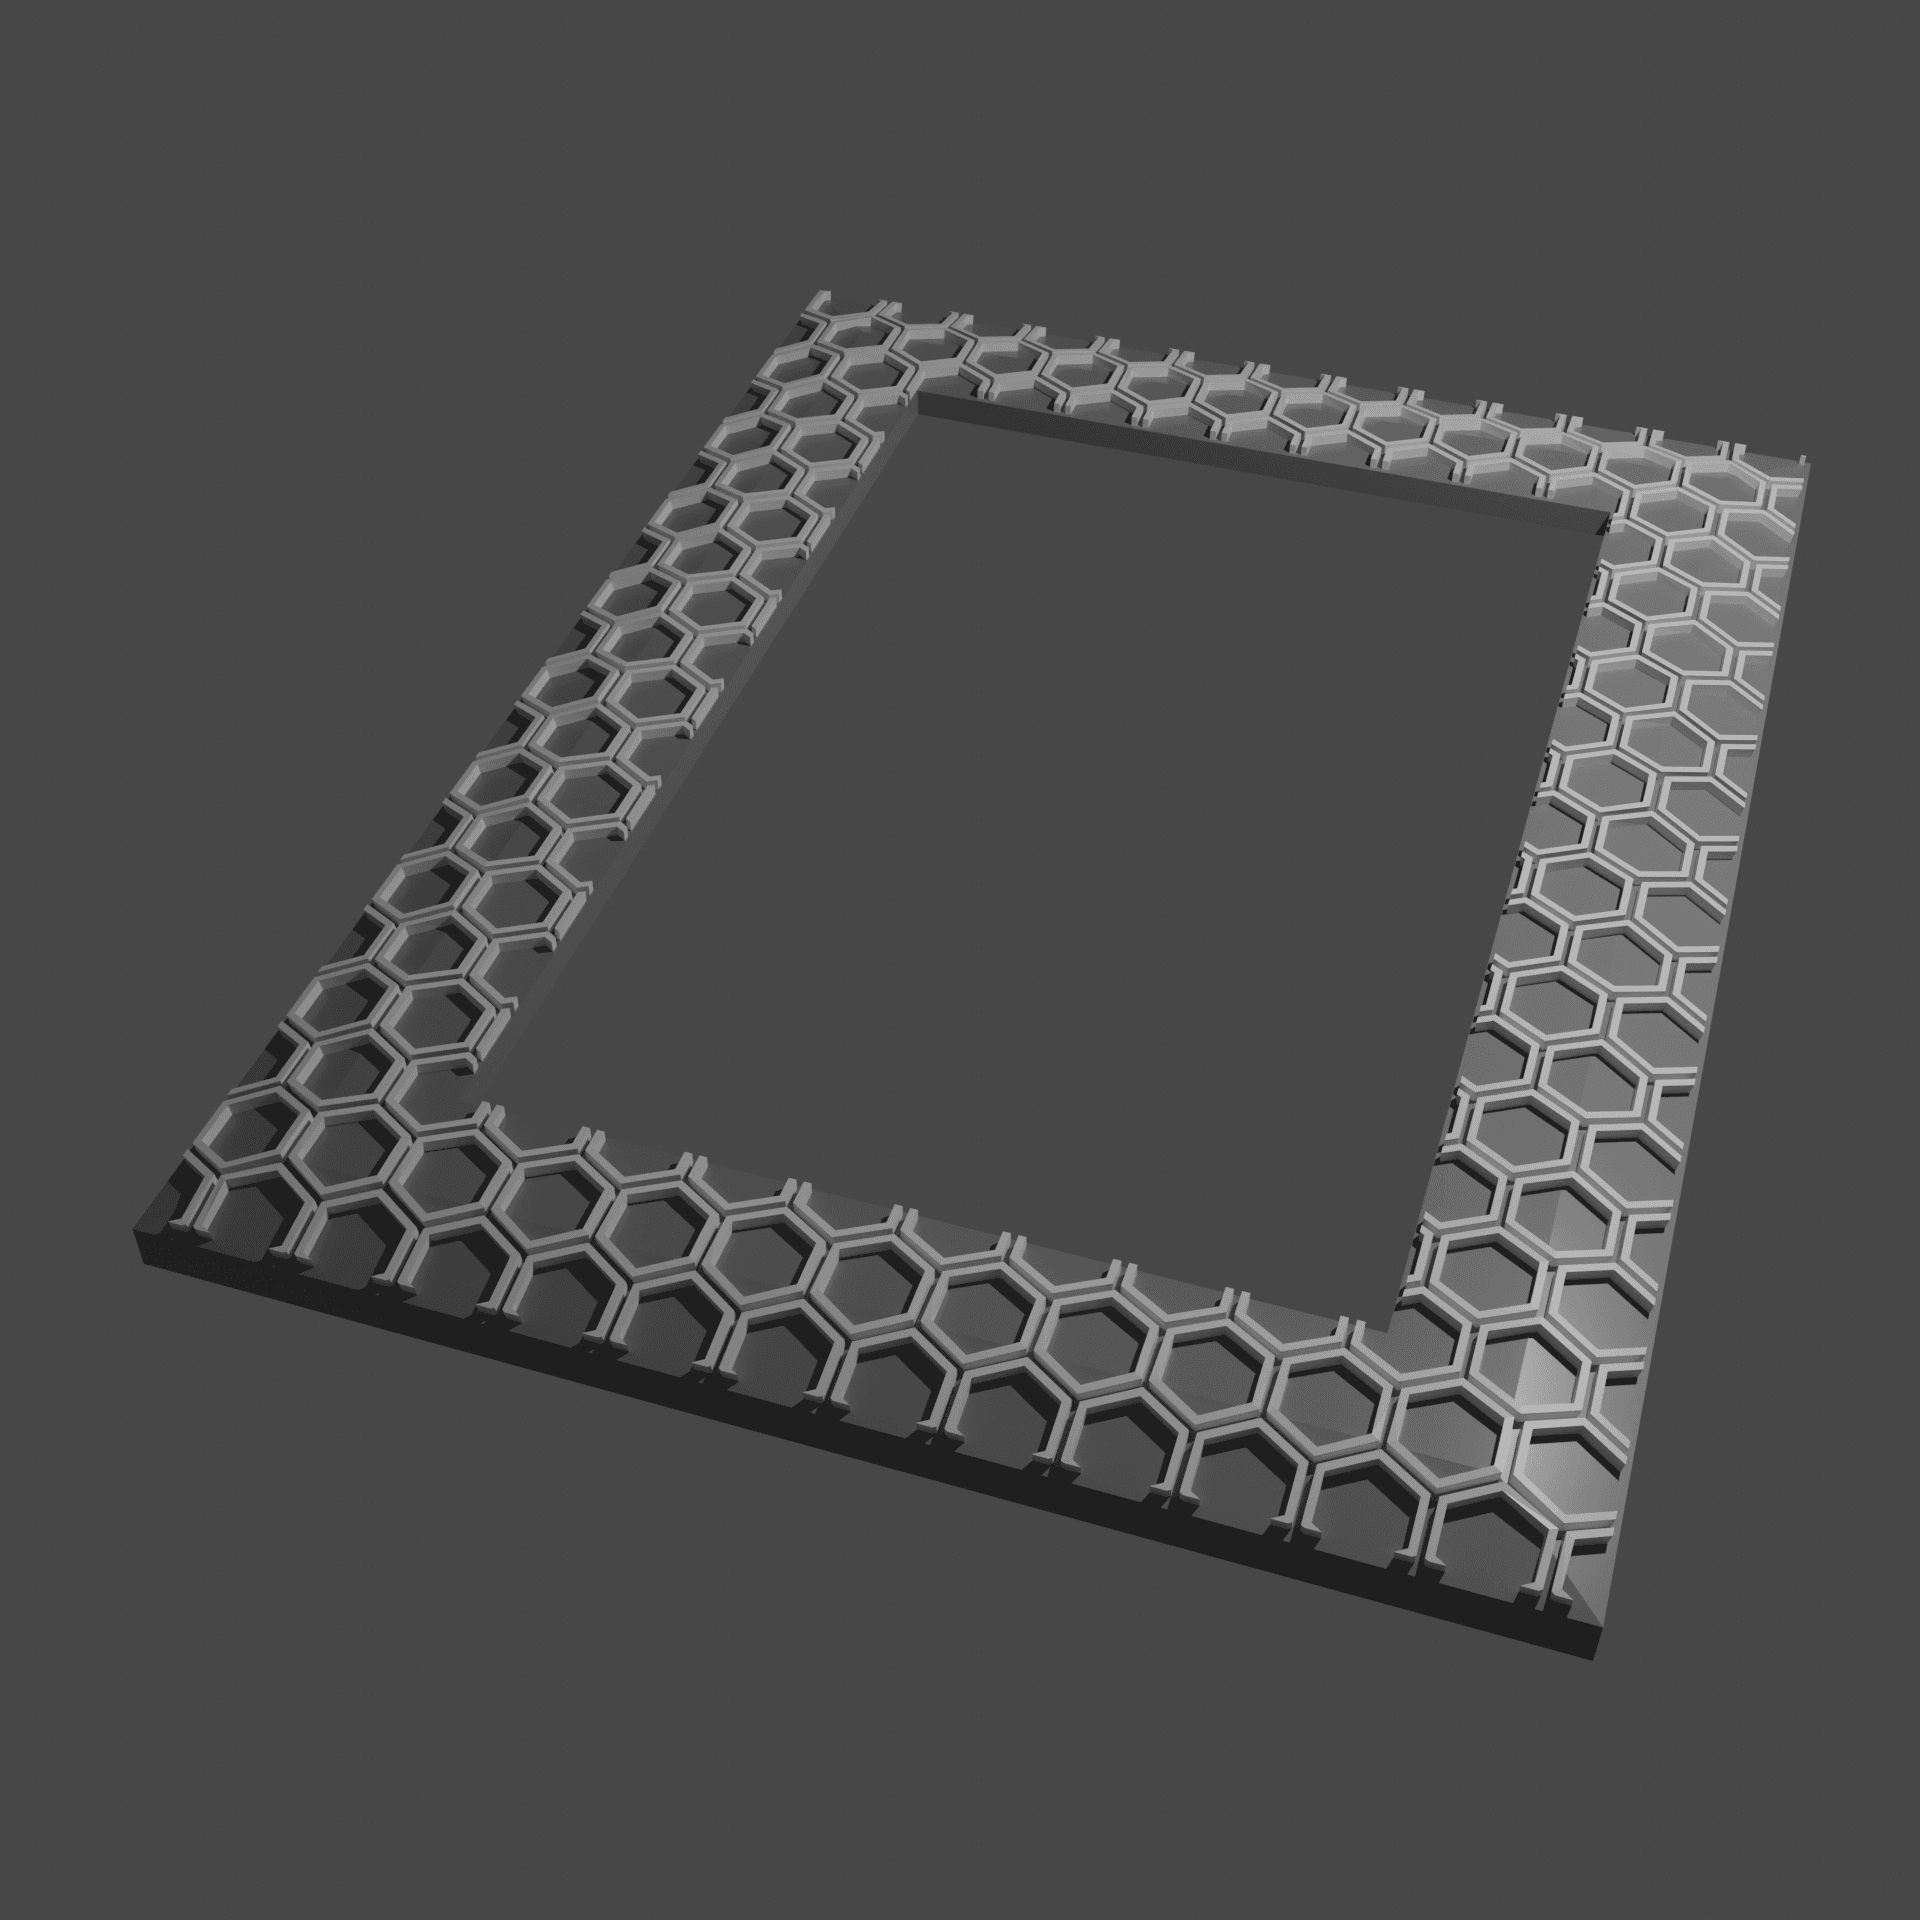 Hexagon - Remix of 4x6 Picture Frame 2 3d model